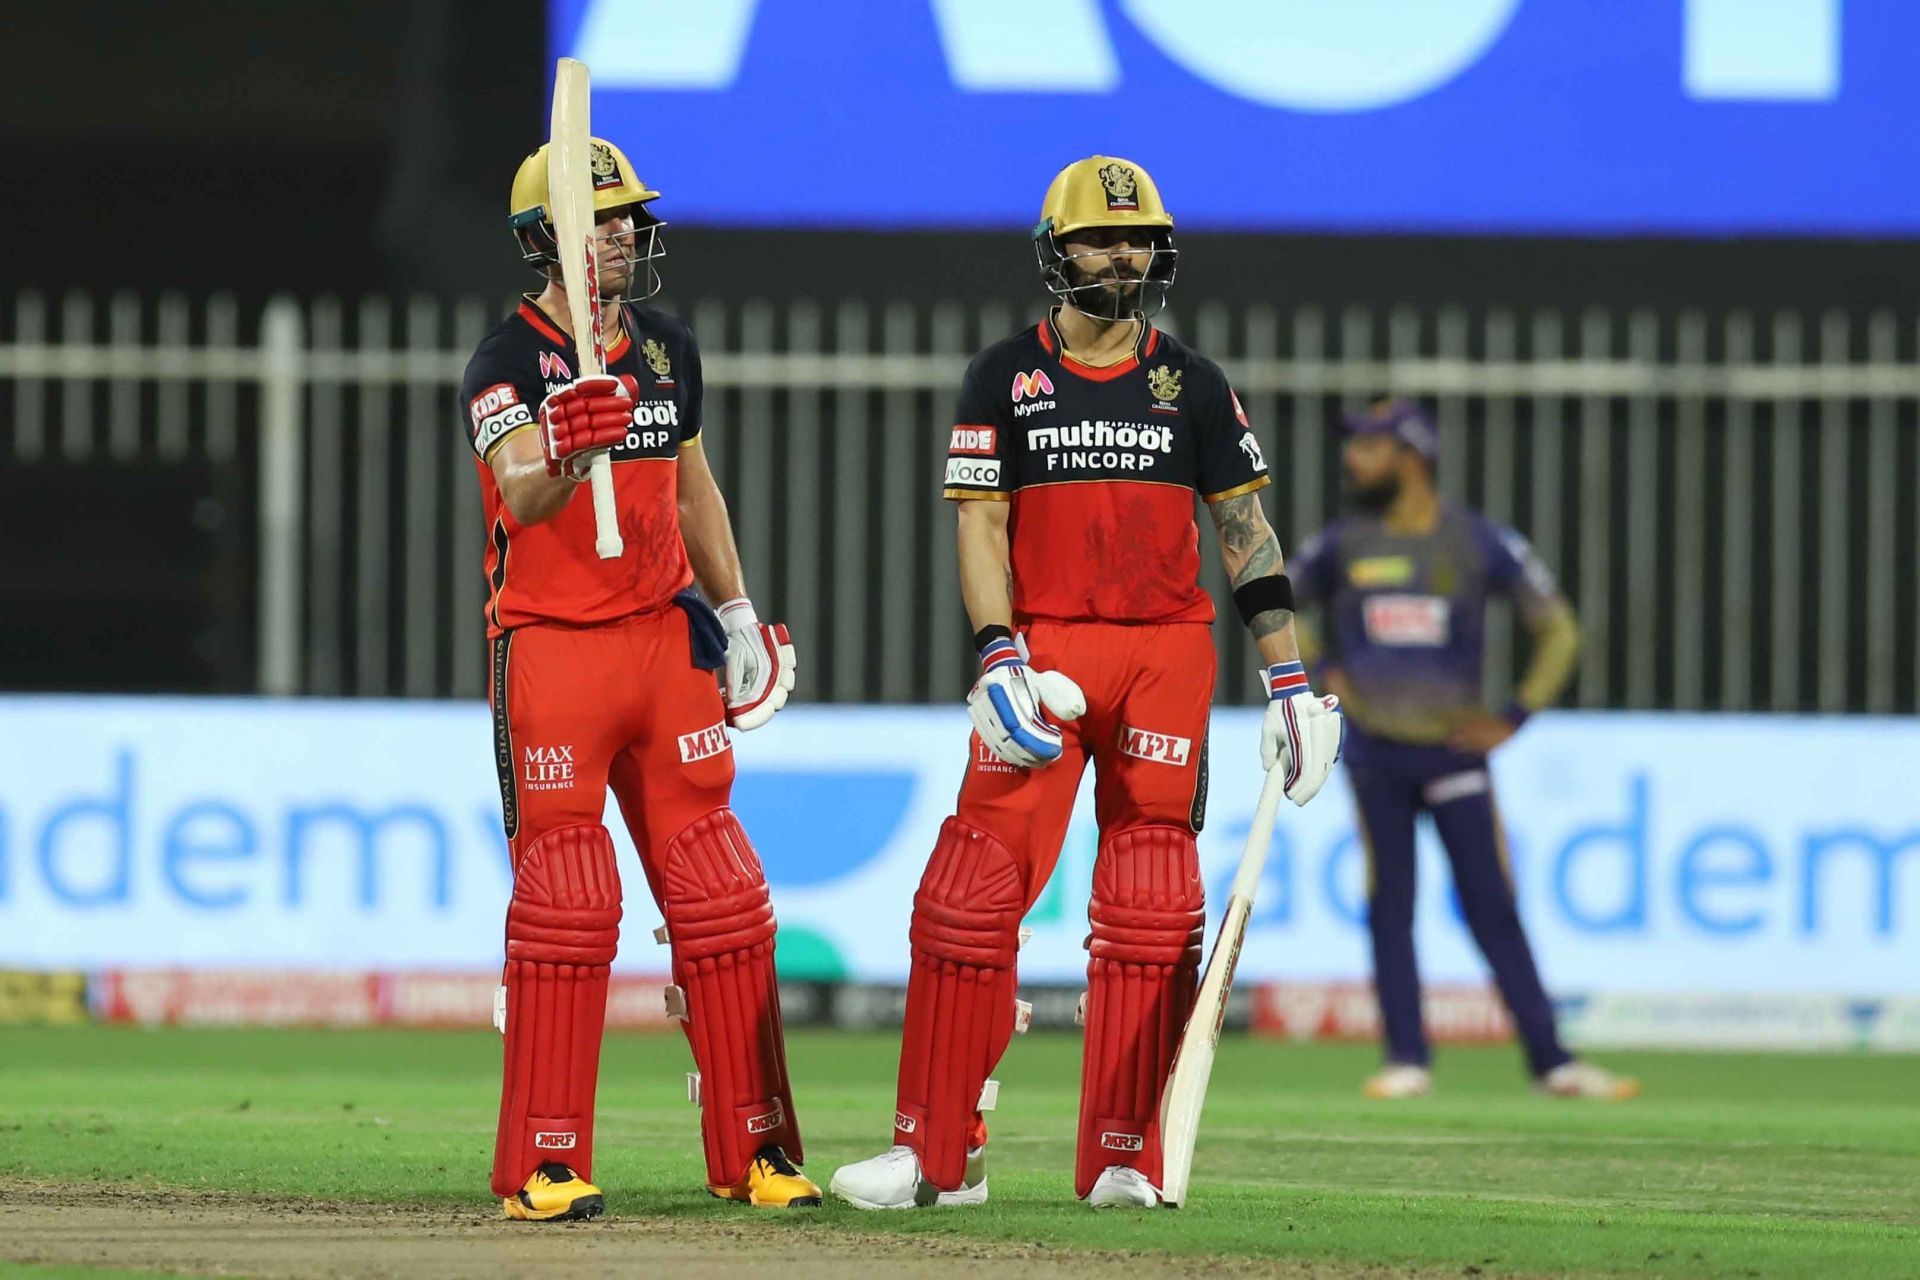 AB de Villiers and Virat Kohli - a partnership for the ages (Picture Credits: IPL).